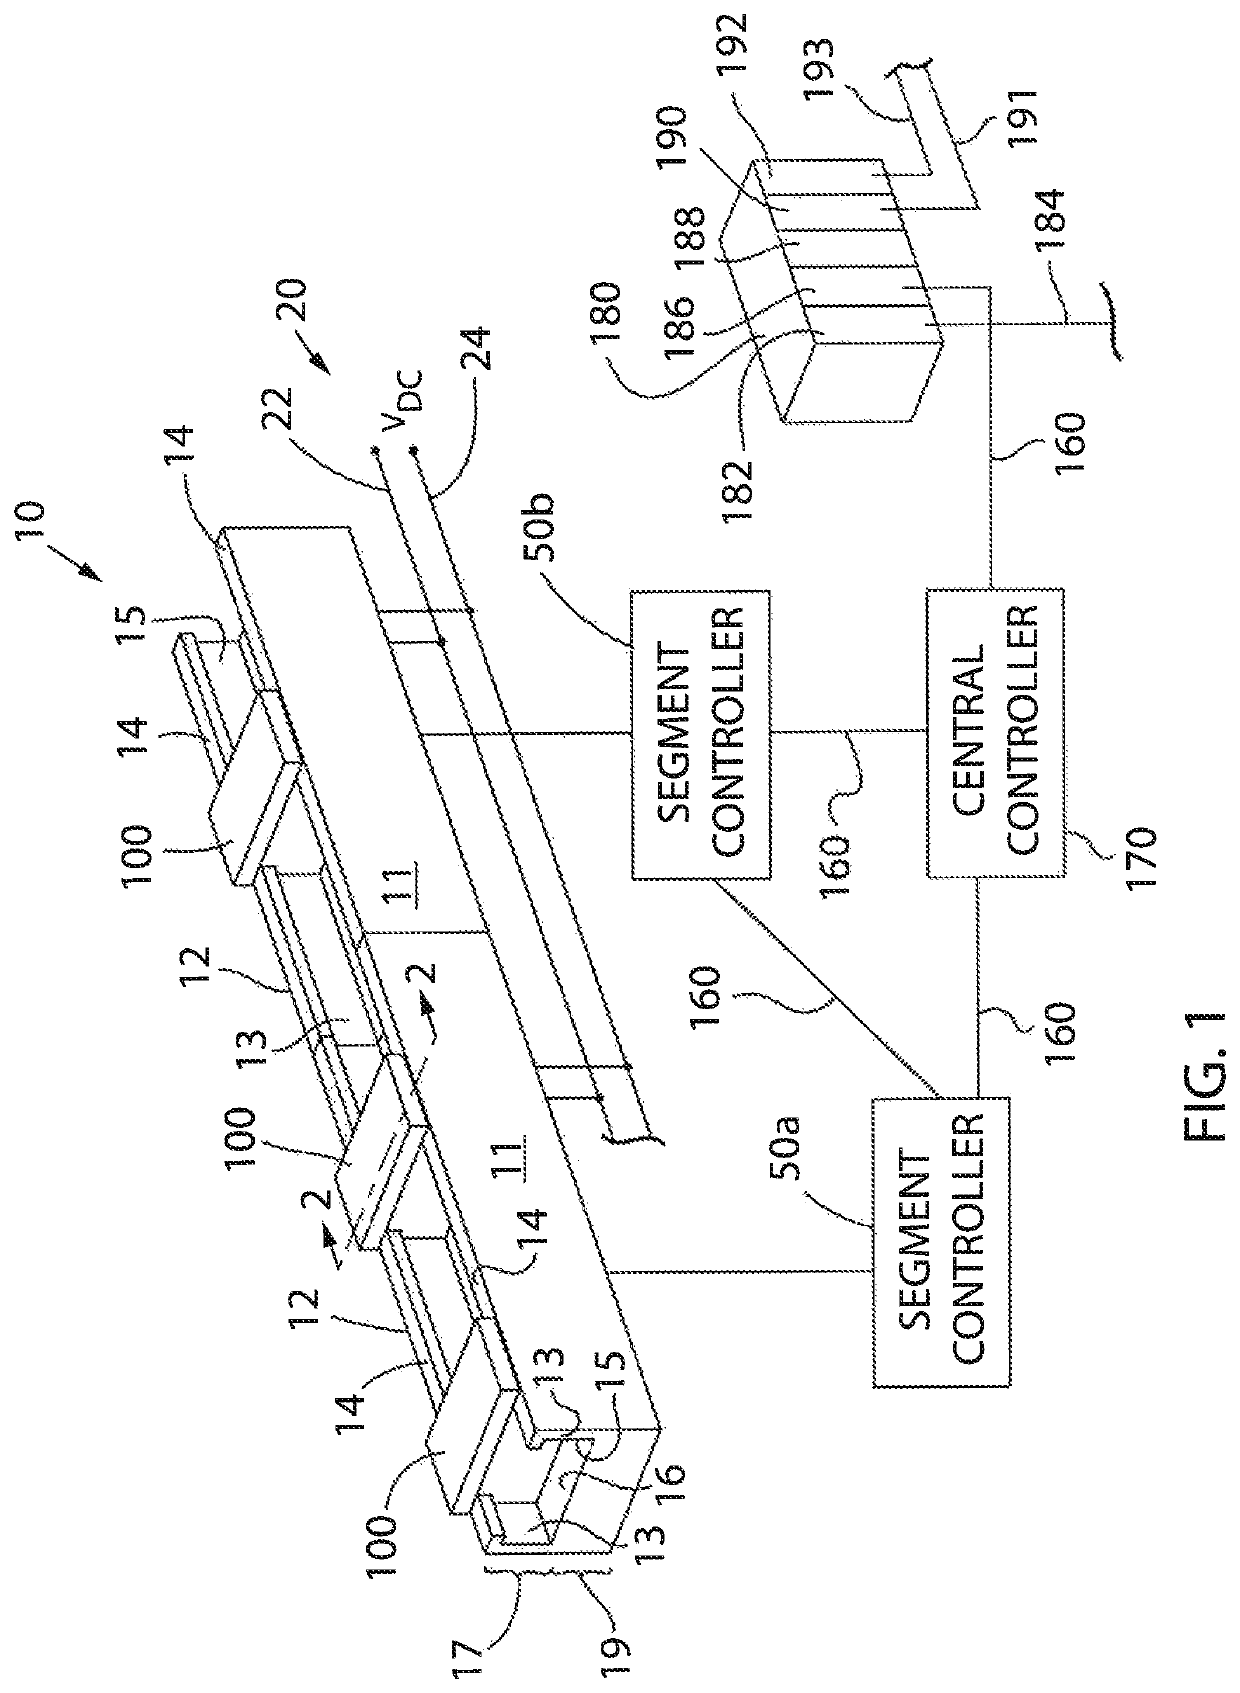 Method and apparatus for providing improved motion control of movers in an independent cart system